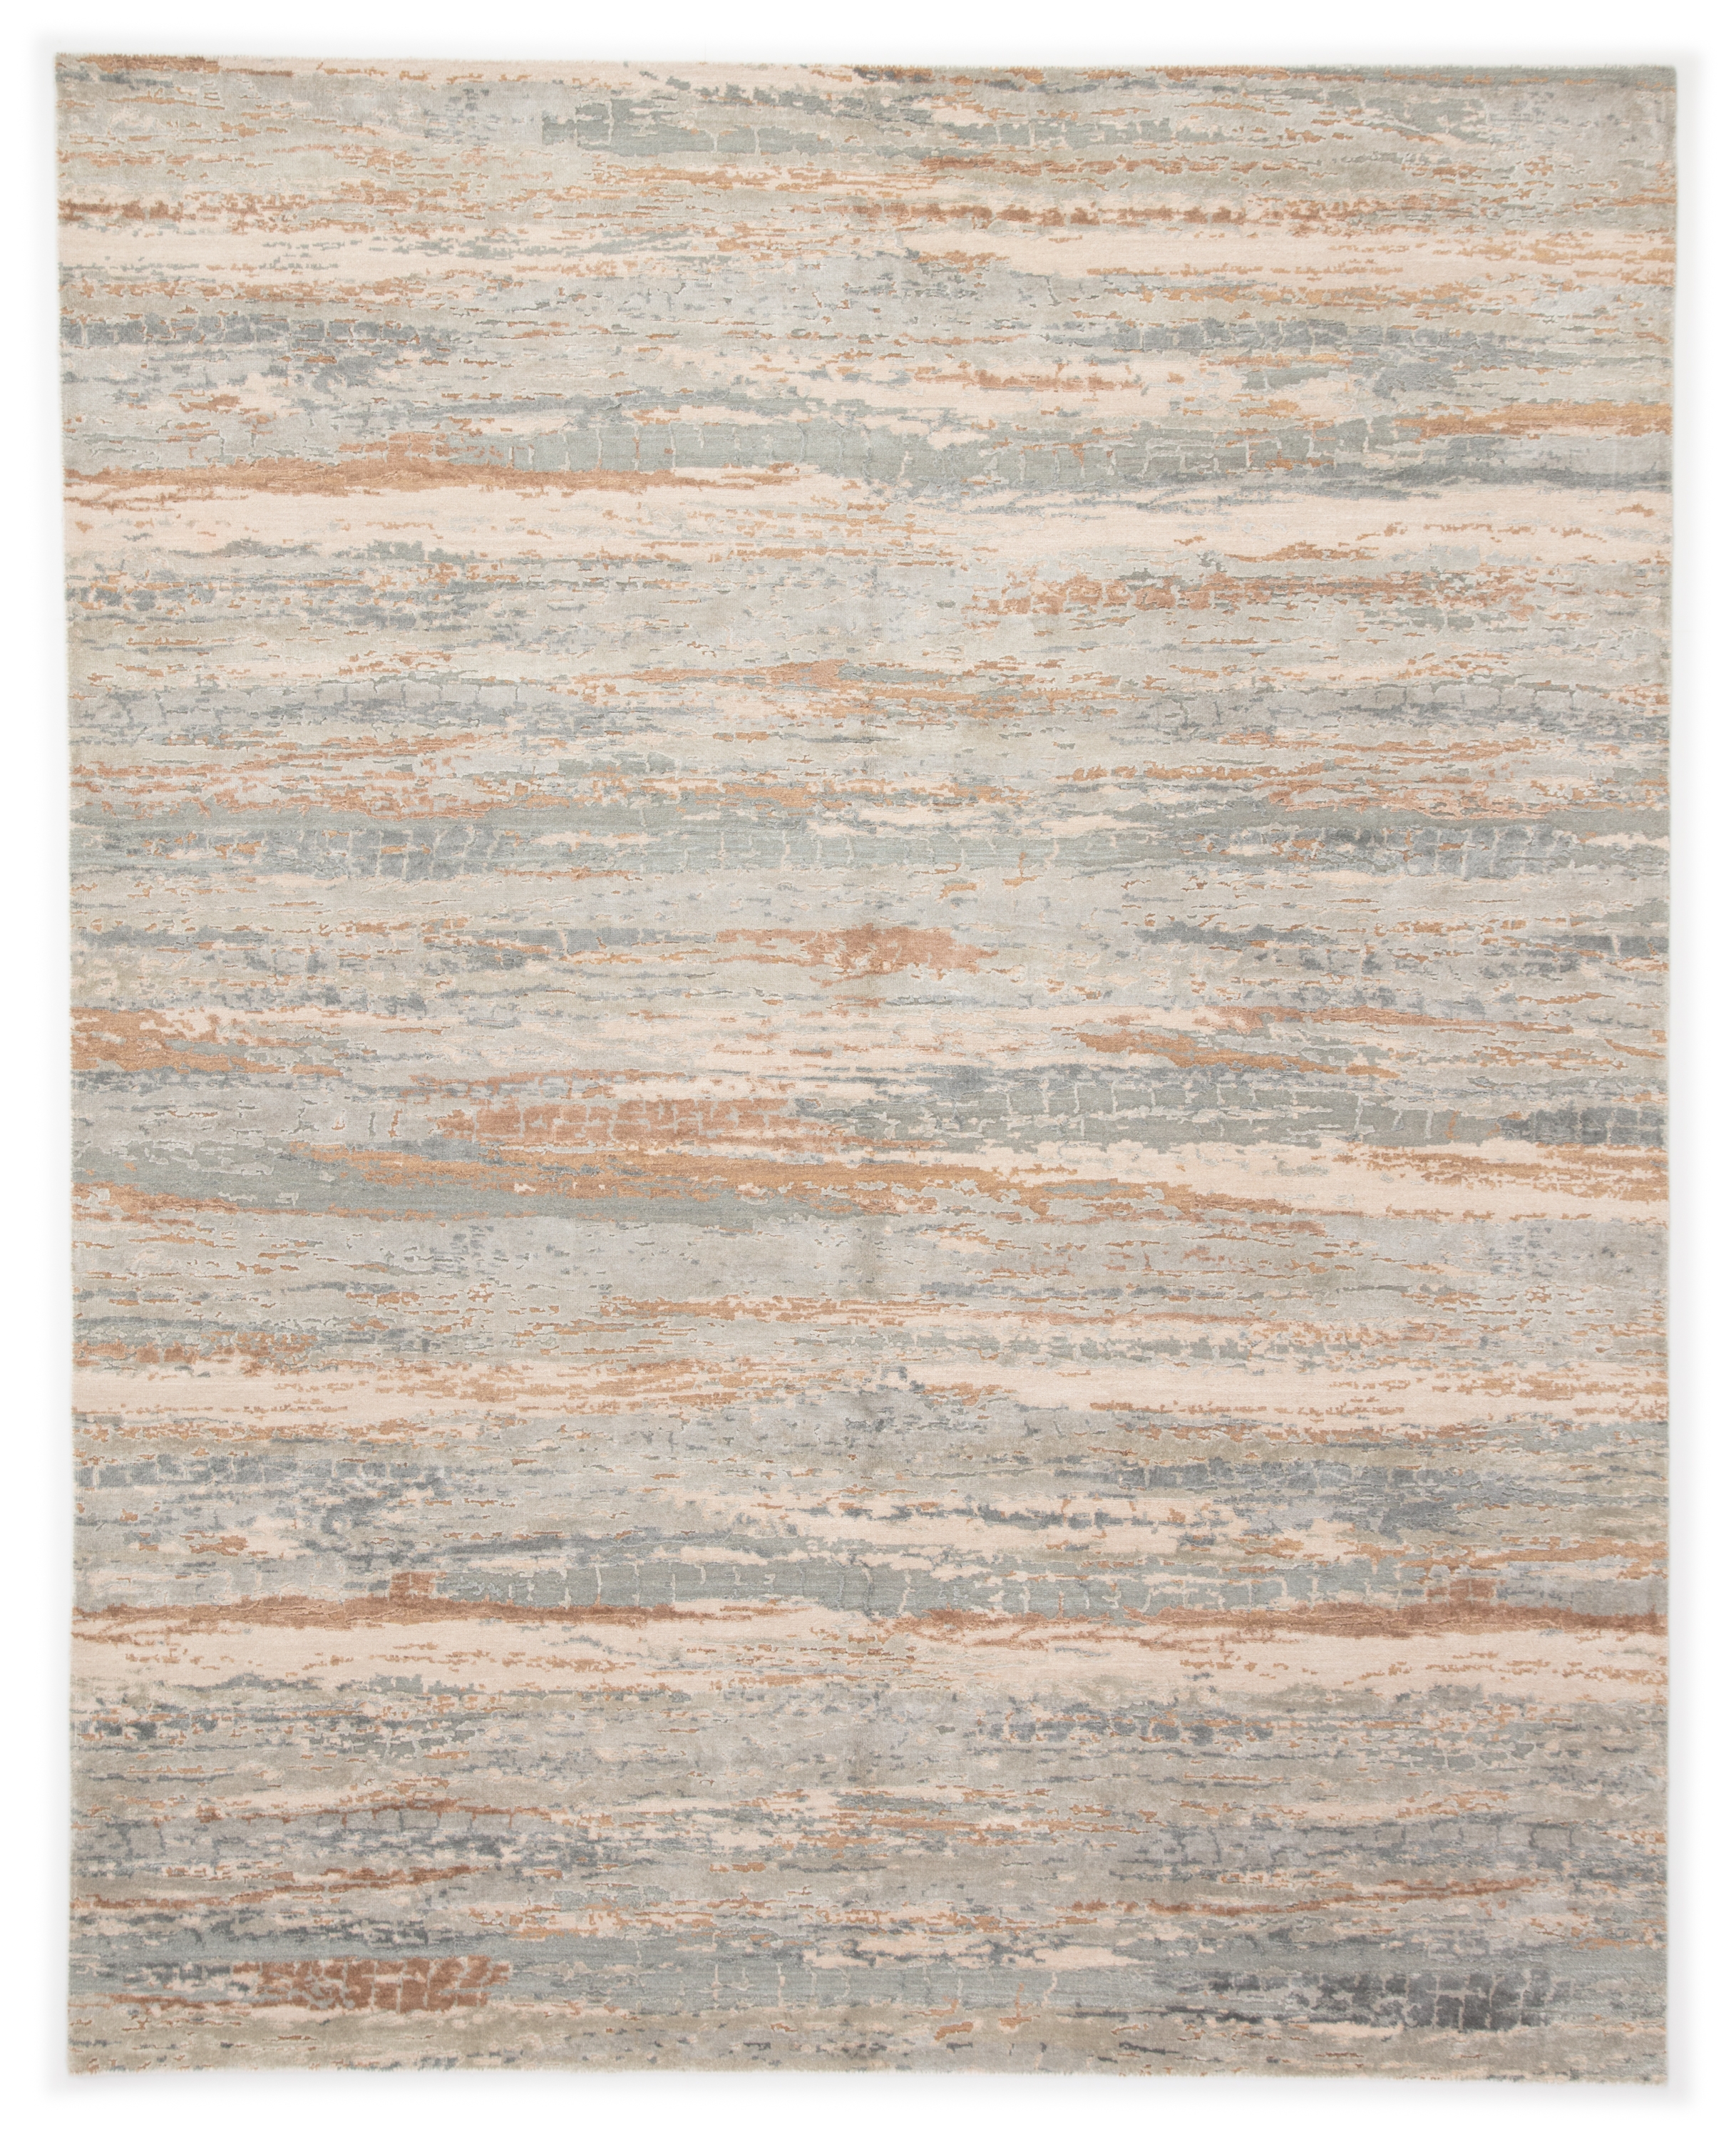 Kavi by Bandi Hand-Knotted Abstract Light Blue/ Tan Area Rug (9'X12') - Image 0